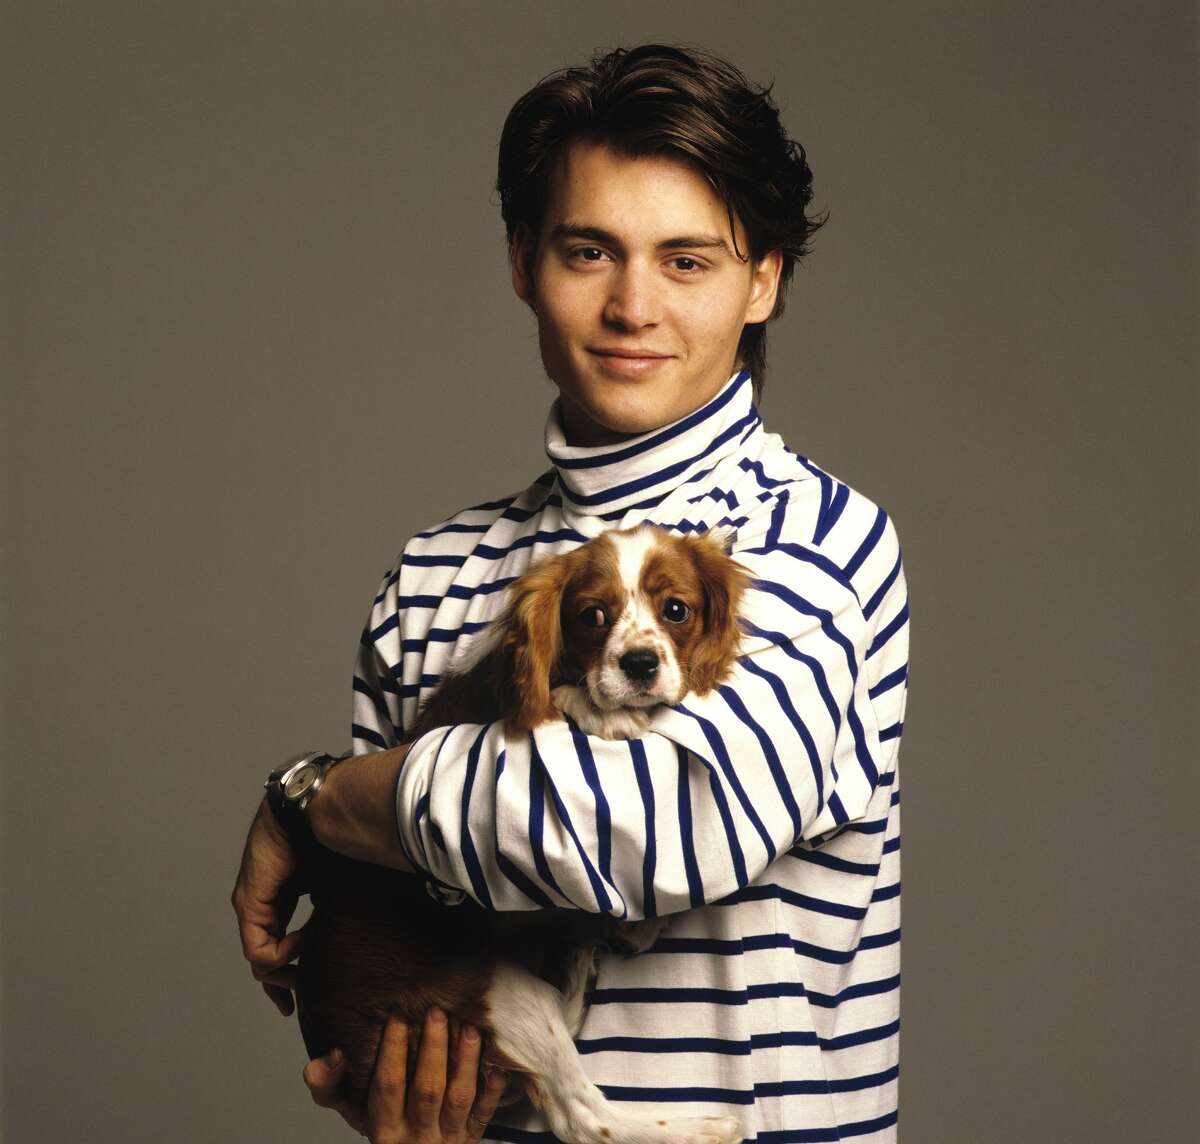 NEW YORK - 1988: Actor Johnny Depp poses for a portrait in 1988 in New York City, New York. (Photo by Deborah Feingold/Getty Images)